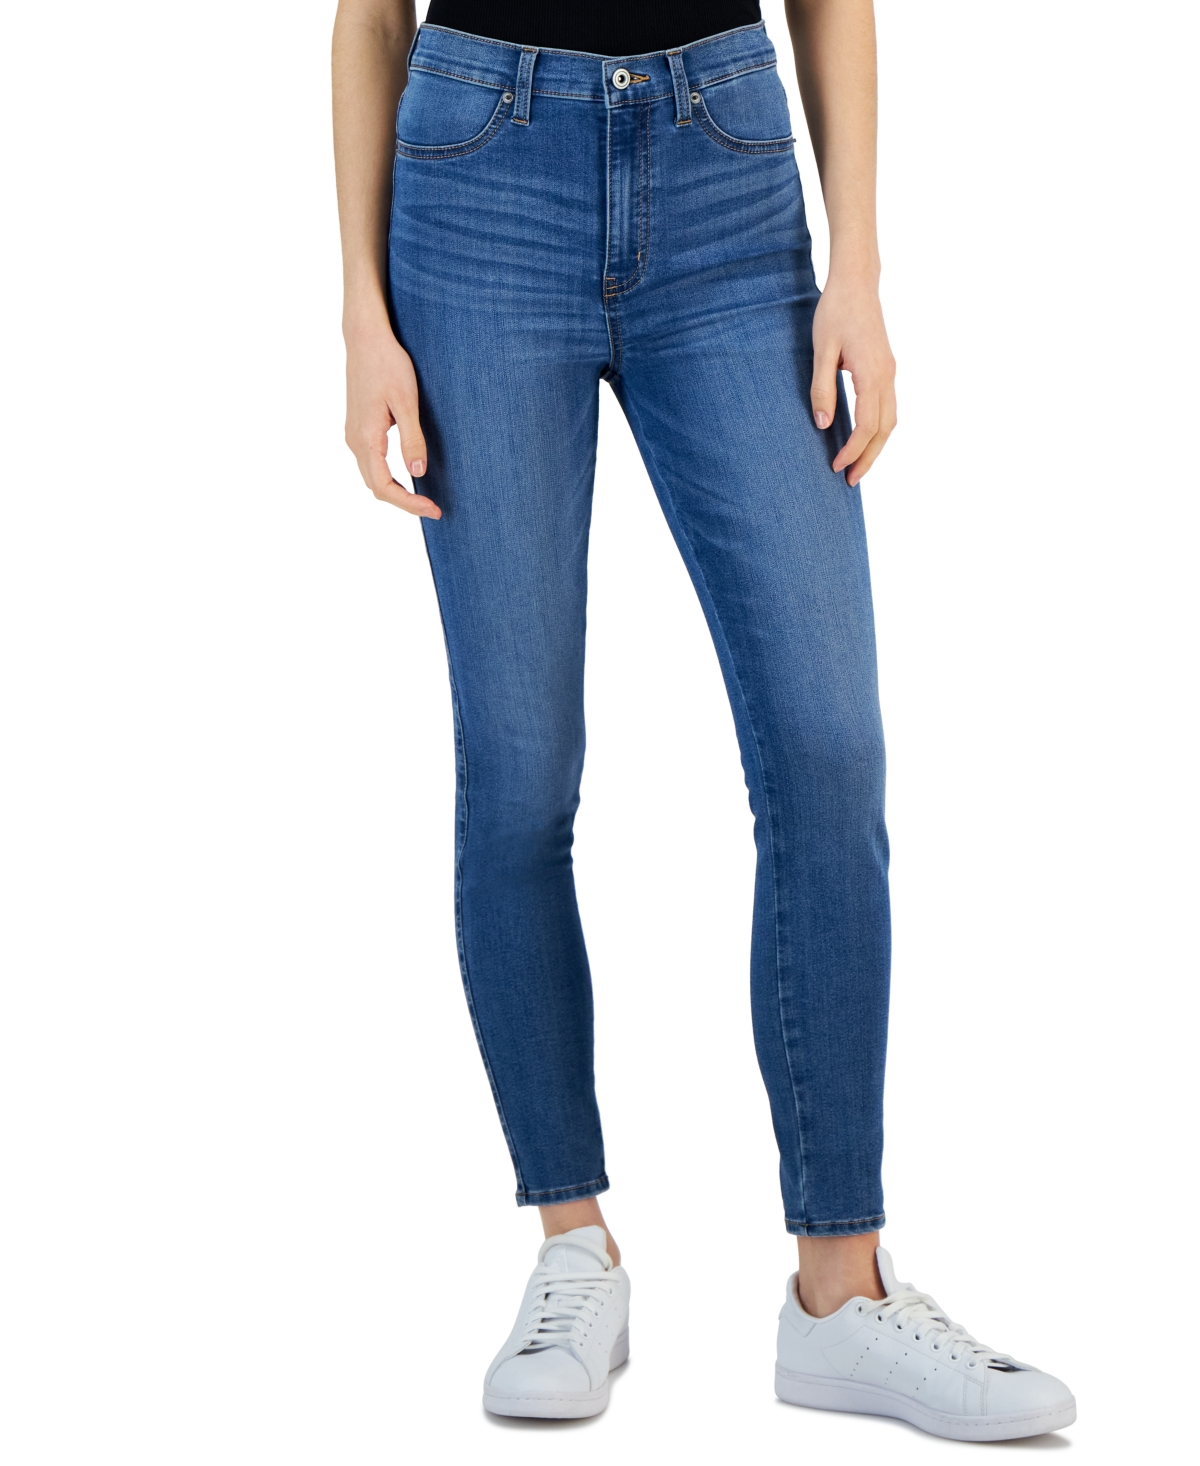  Celebrity Pink Juniors' Curvy High-Rise Skinny Jeans